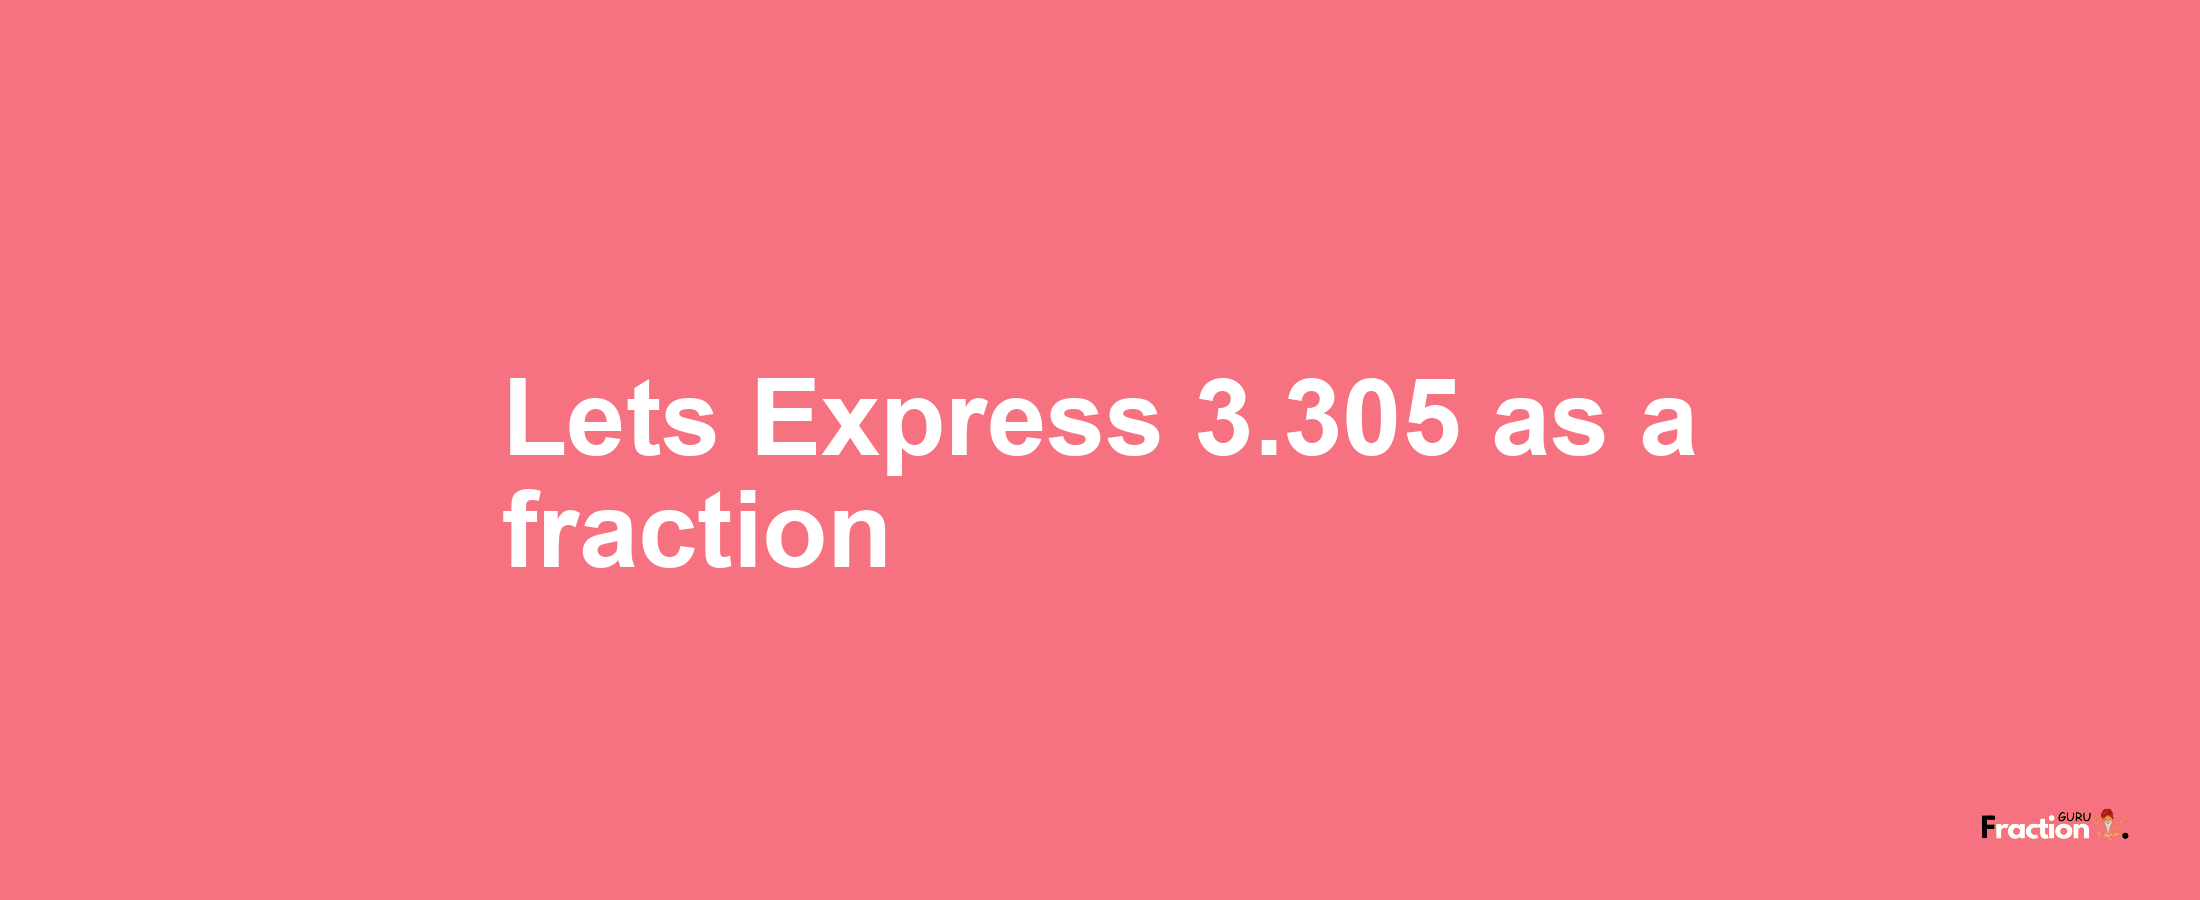 Lets Express 3.305 as afraction